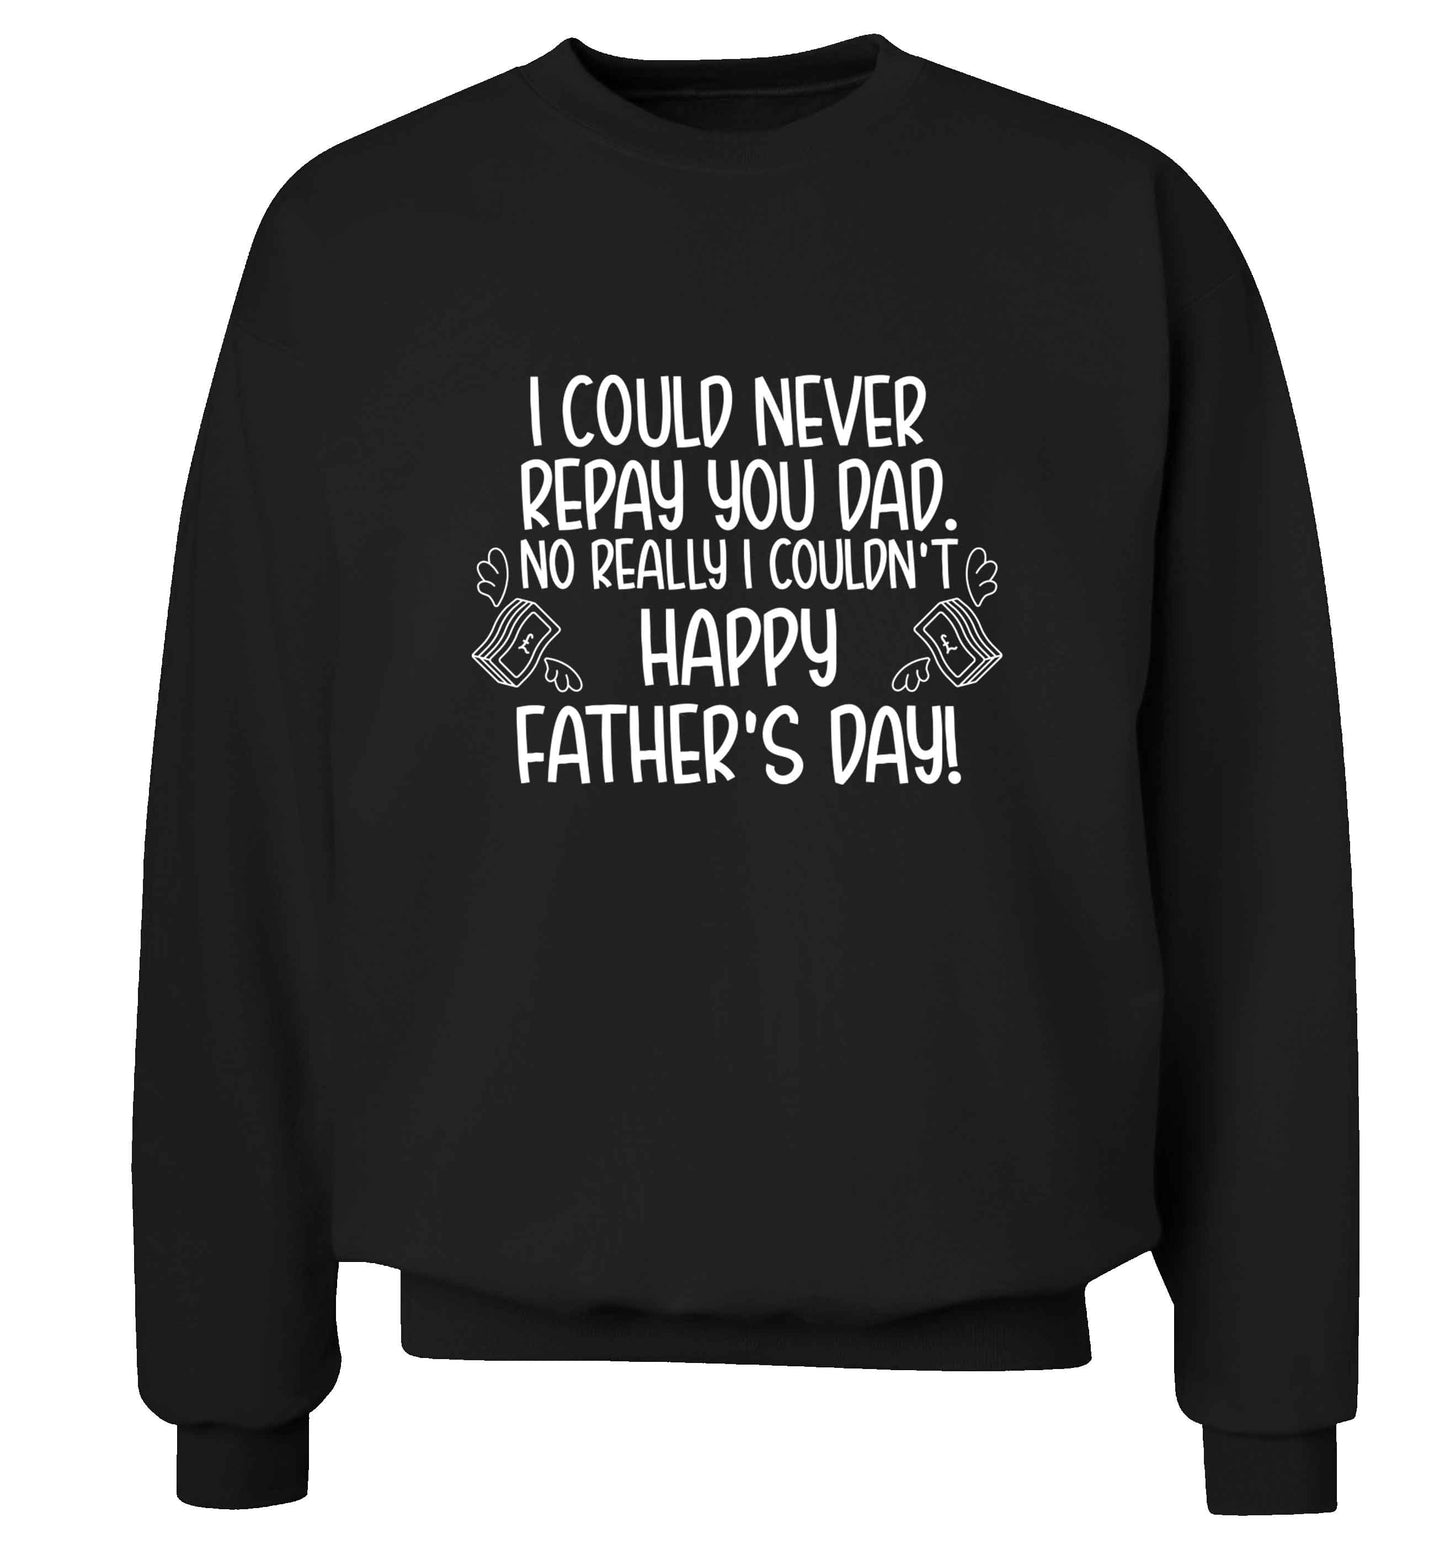 I could never repay you dad. No I really couldn't happy Father's day! adult's unisex black sweater 2XL